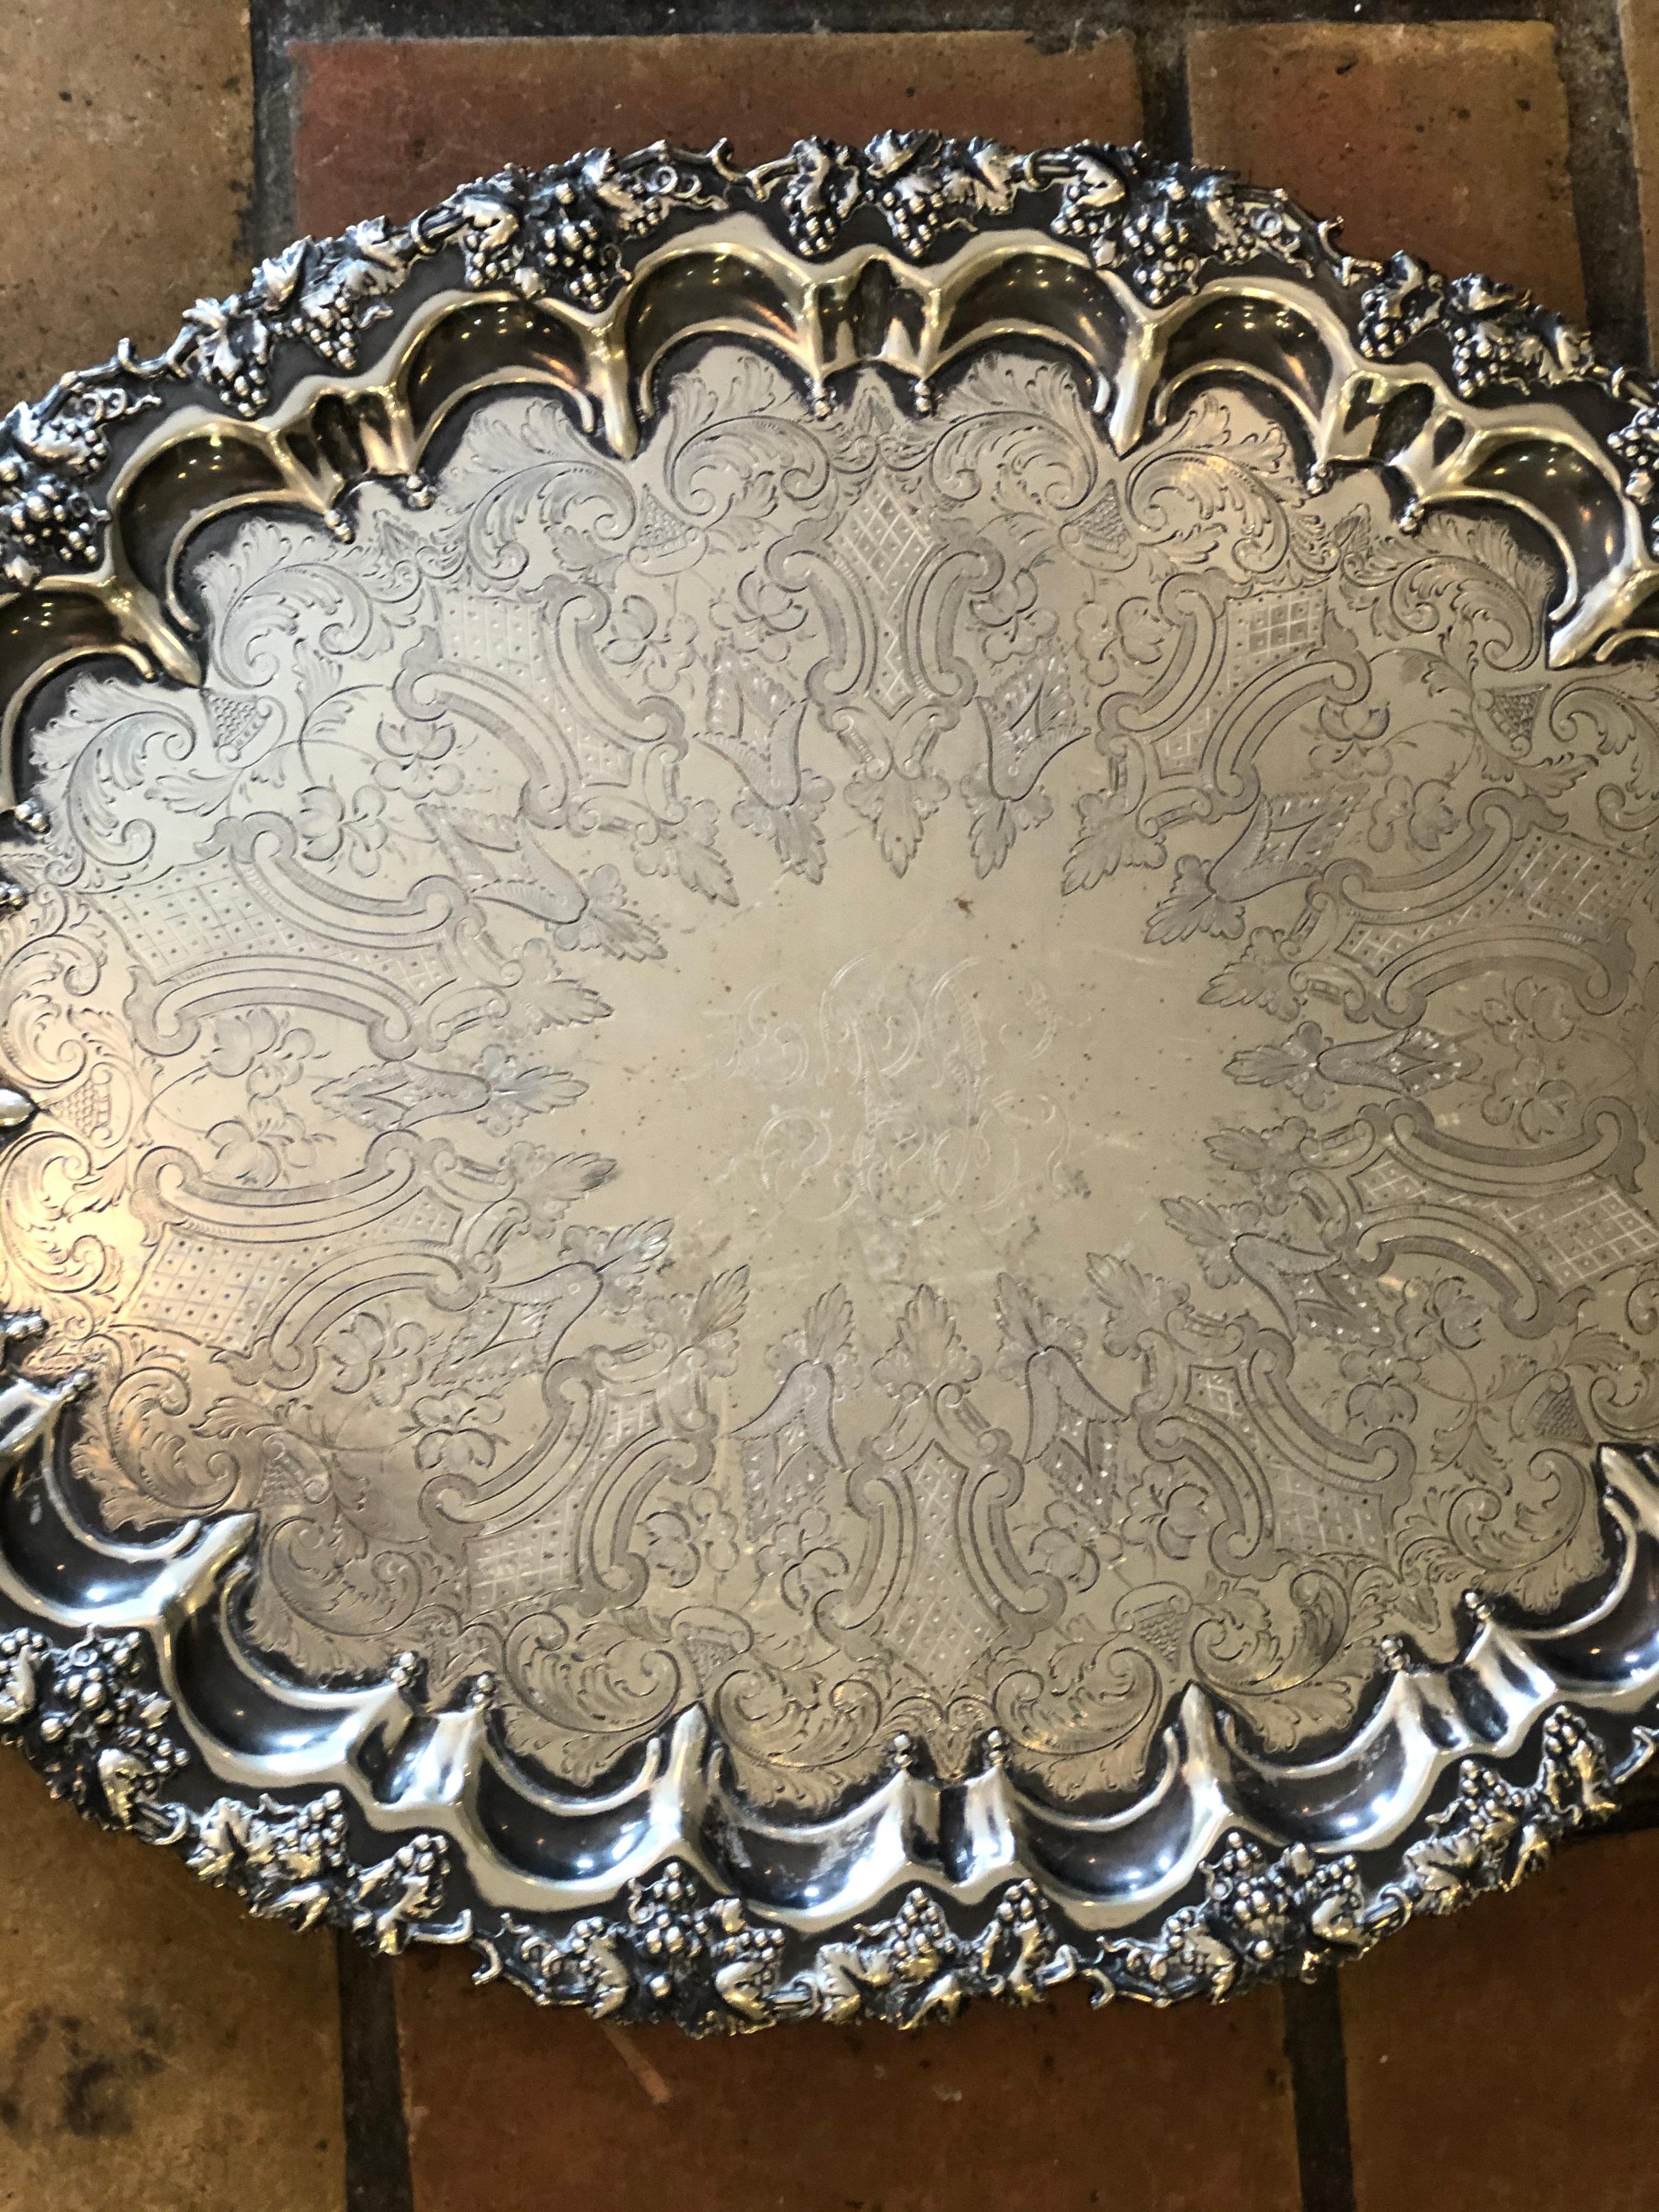 Art Noveau Silver Plated Oval Serving Tray by Singleton, Benda & Co Ltd In Good Condition For Sale In Redding, CT